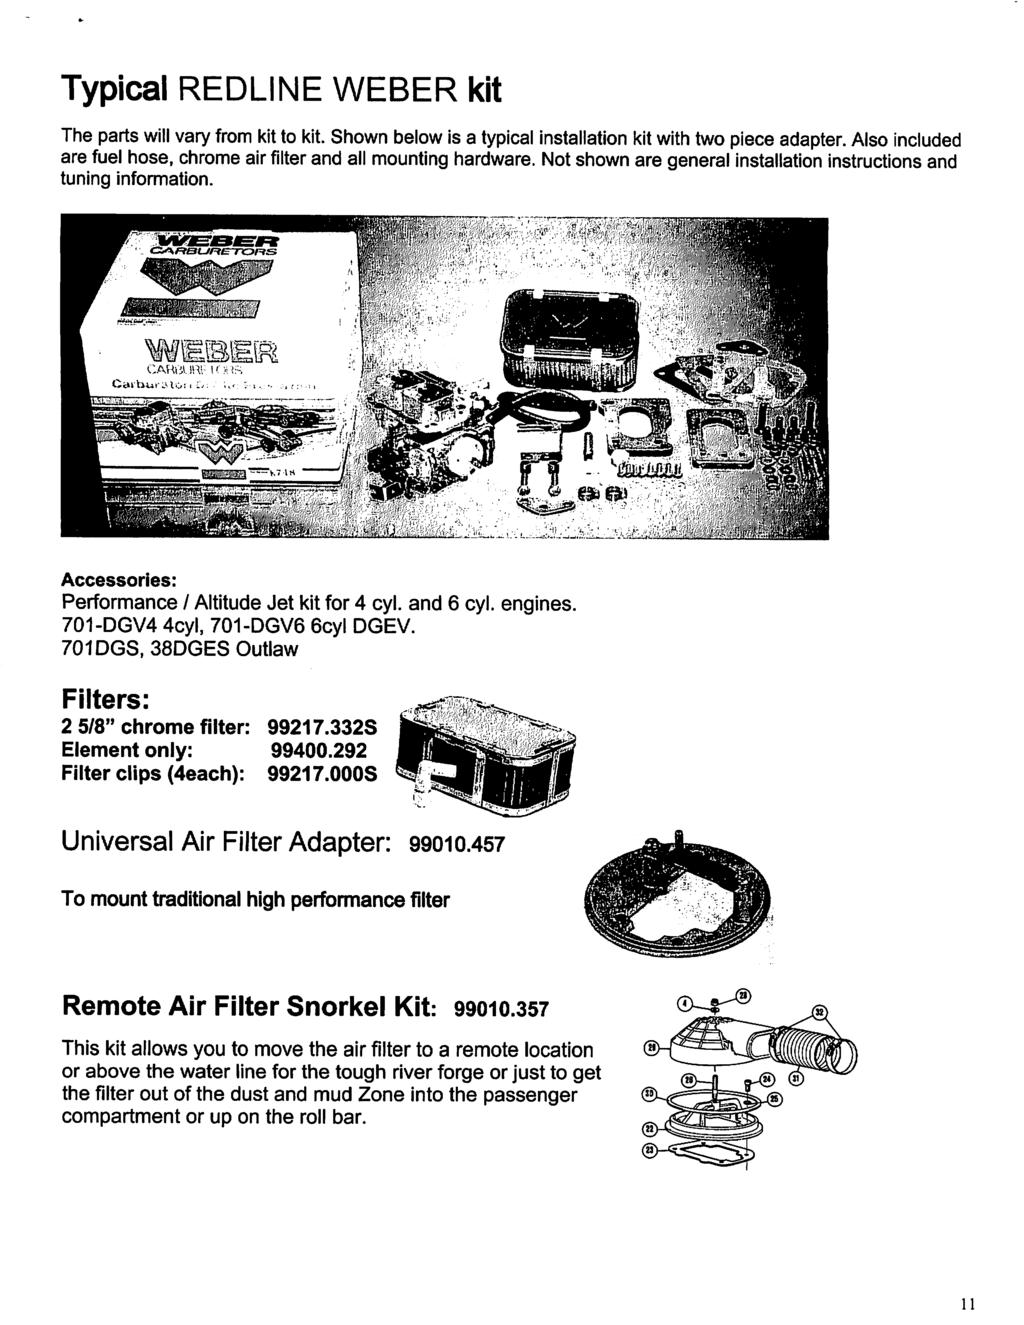 Typical REDLINE WEBER kit The parts will vary from kit to kit. Shown below is a typical installation kit with two piece adapter.